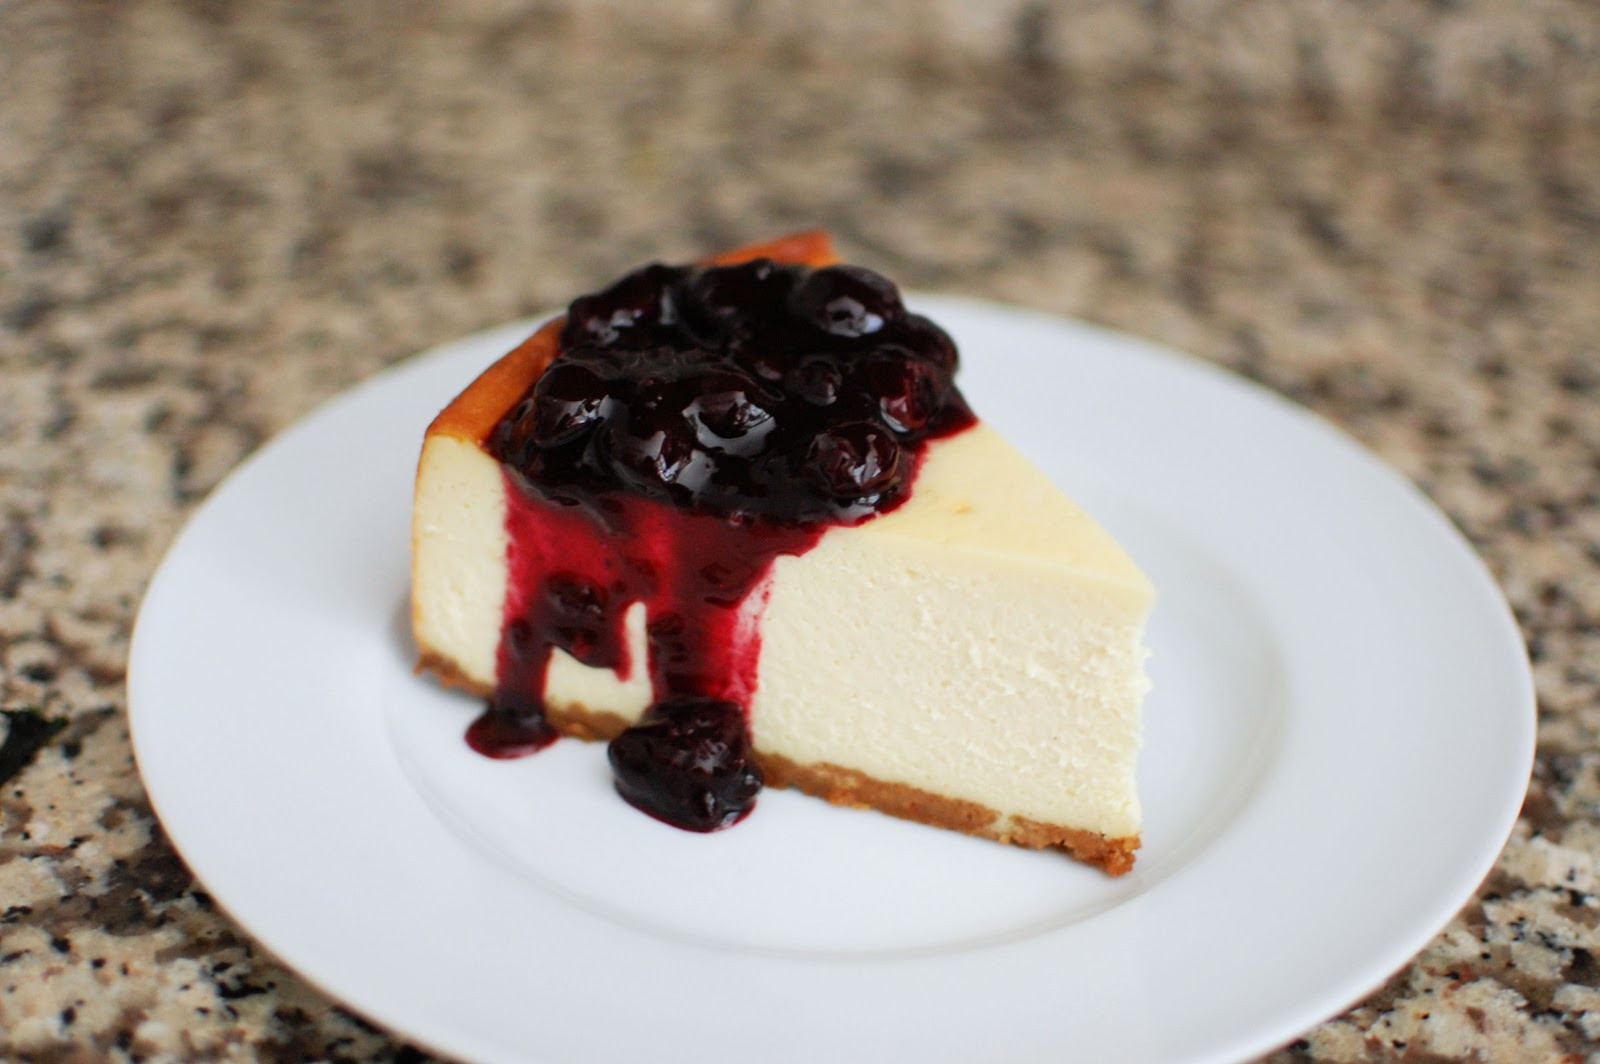 Blueberry Topping For Cheesecake Recipe
 New York Style Cheesecake with Blueberry Sauce